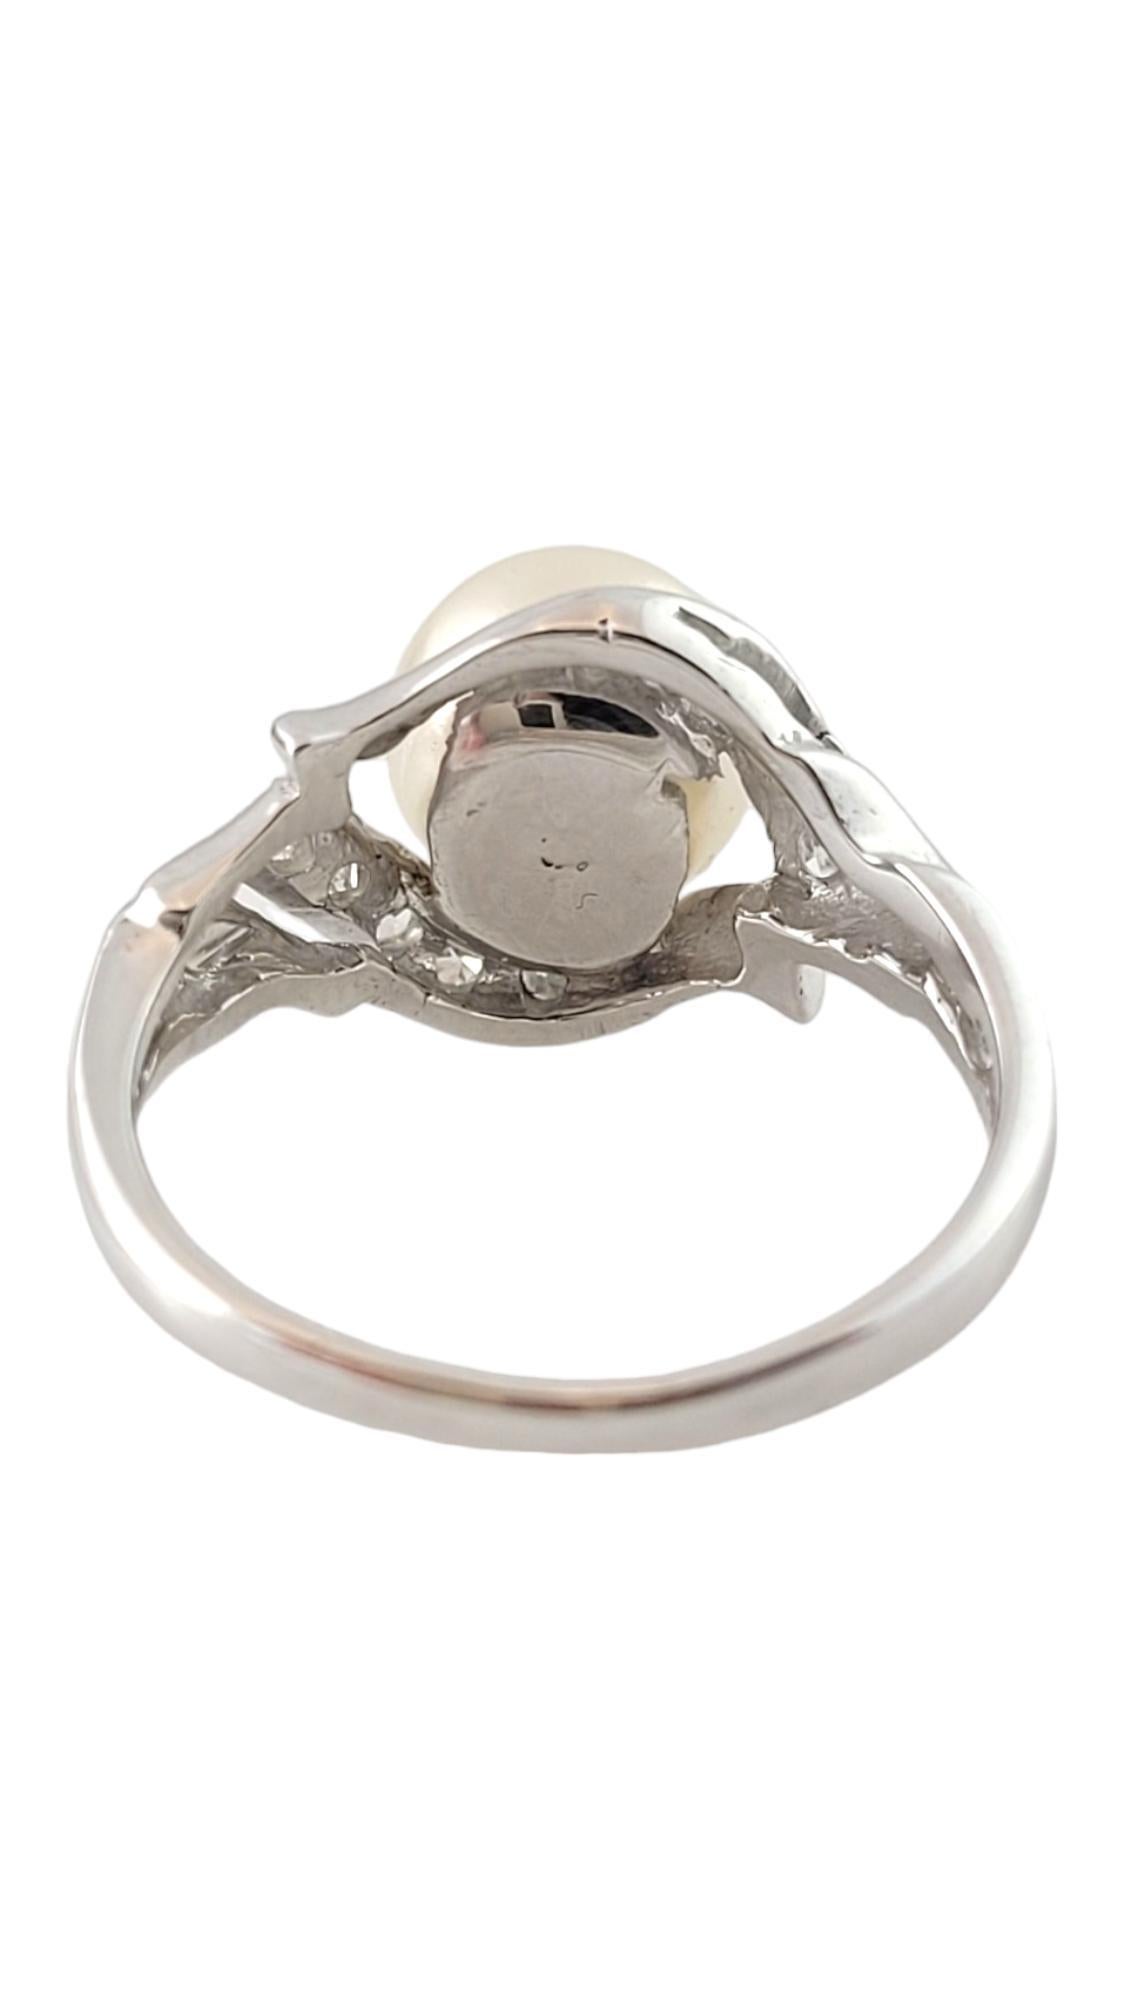 14K White Gold Diamond and Pearl Ring Size 5.25 #16424 In Good Condition For Sale In Washington Depot, CT